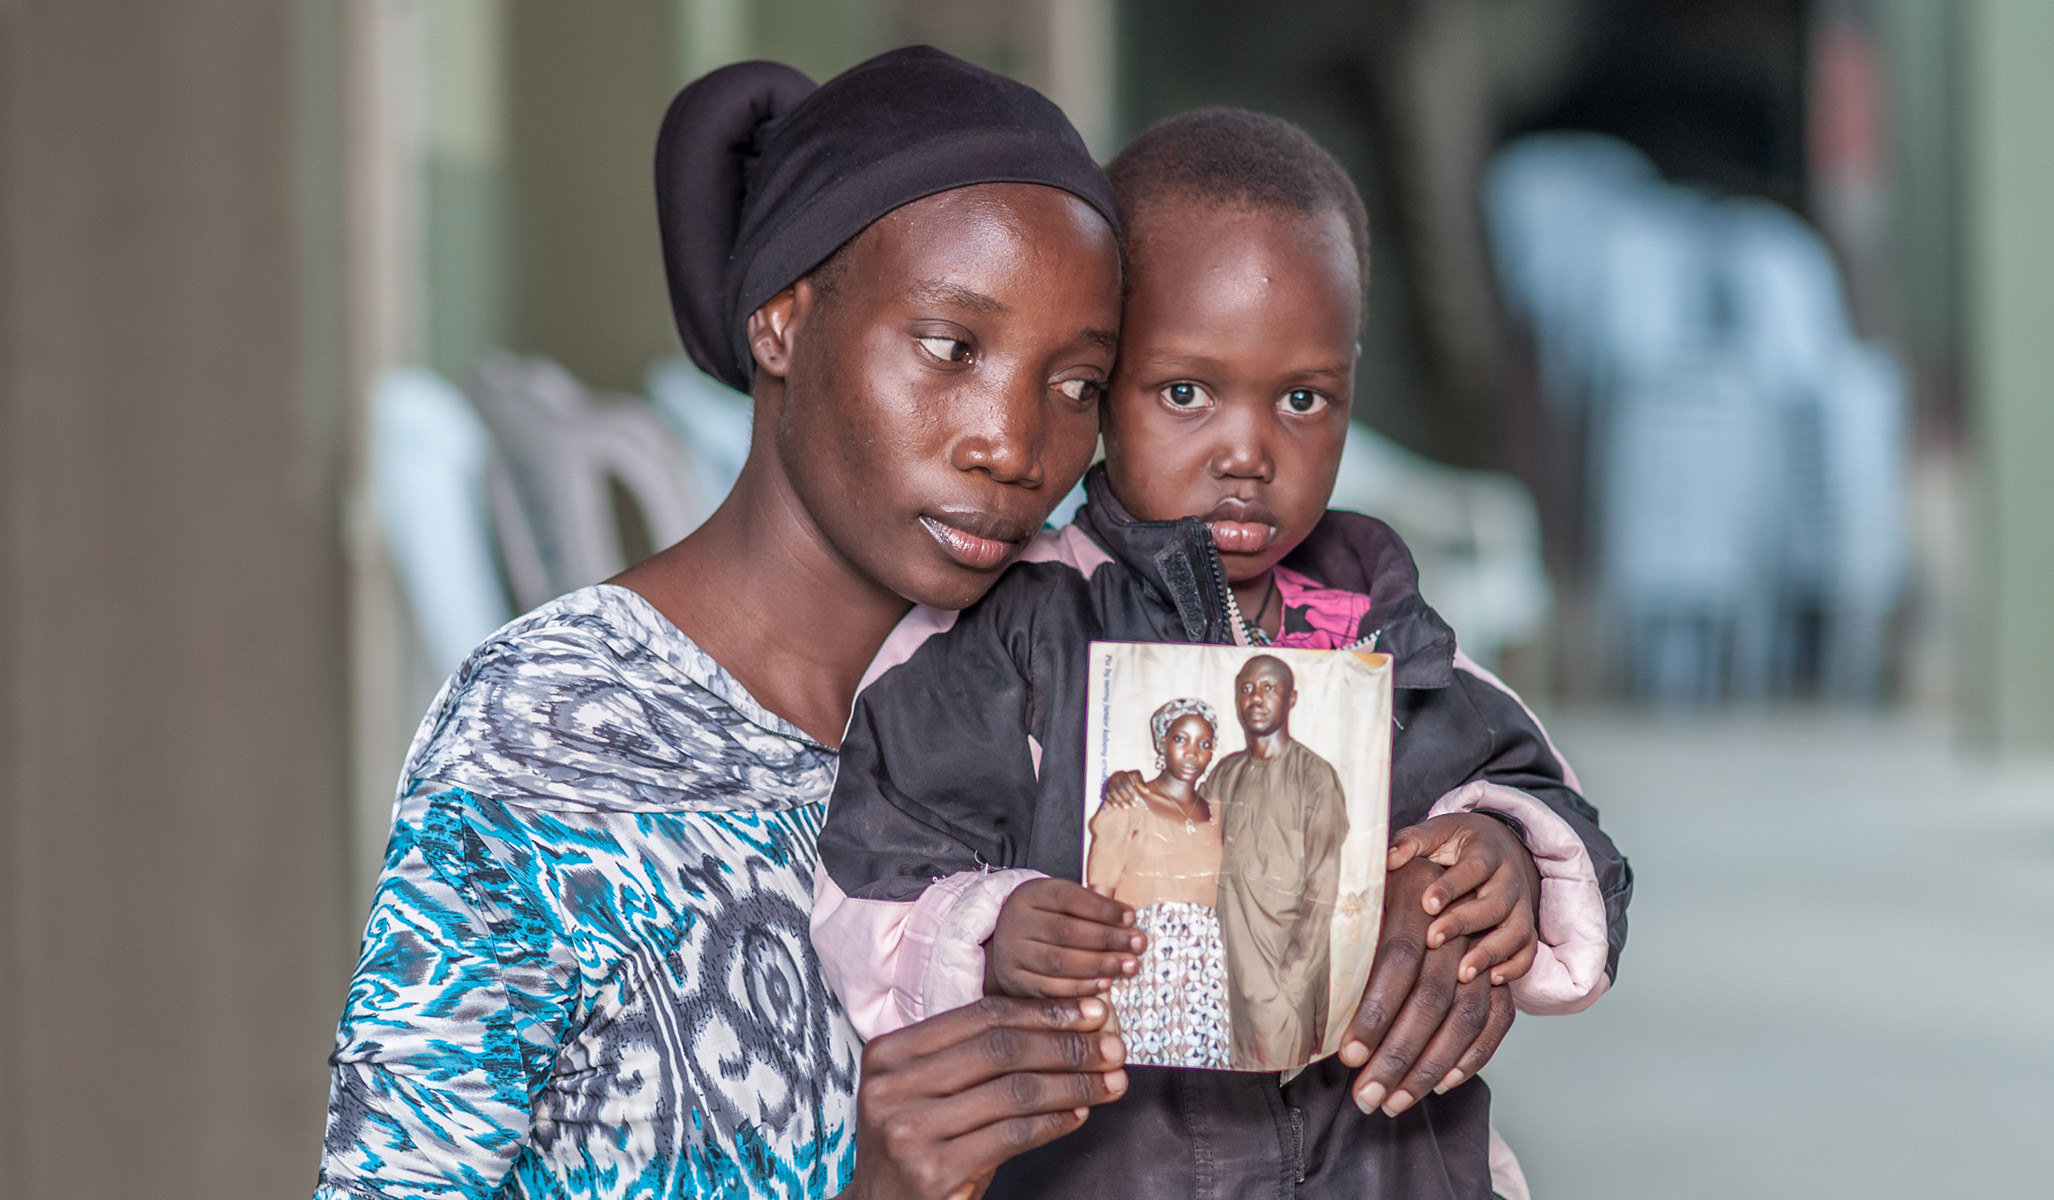 Mom with child holding image of martyred father